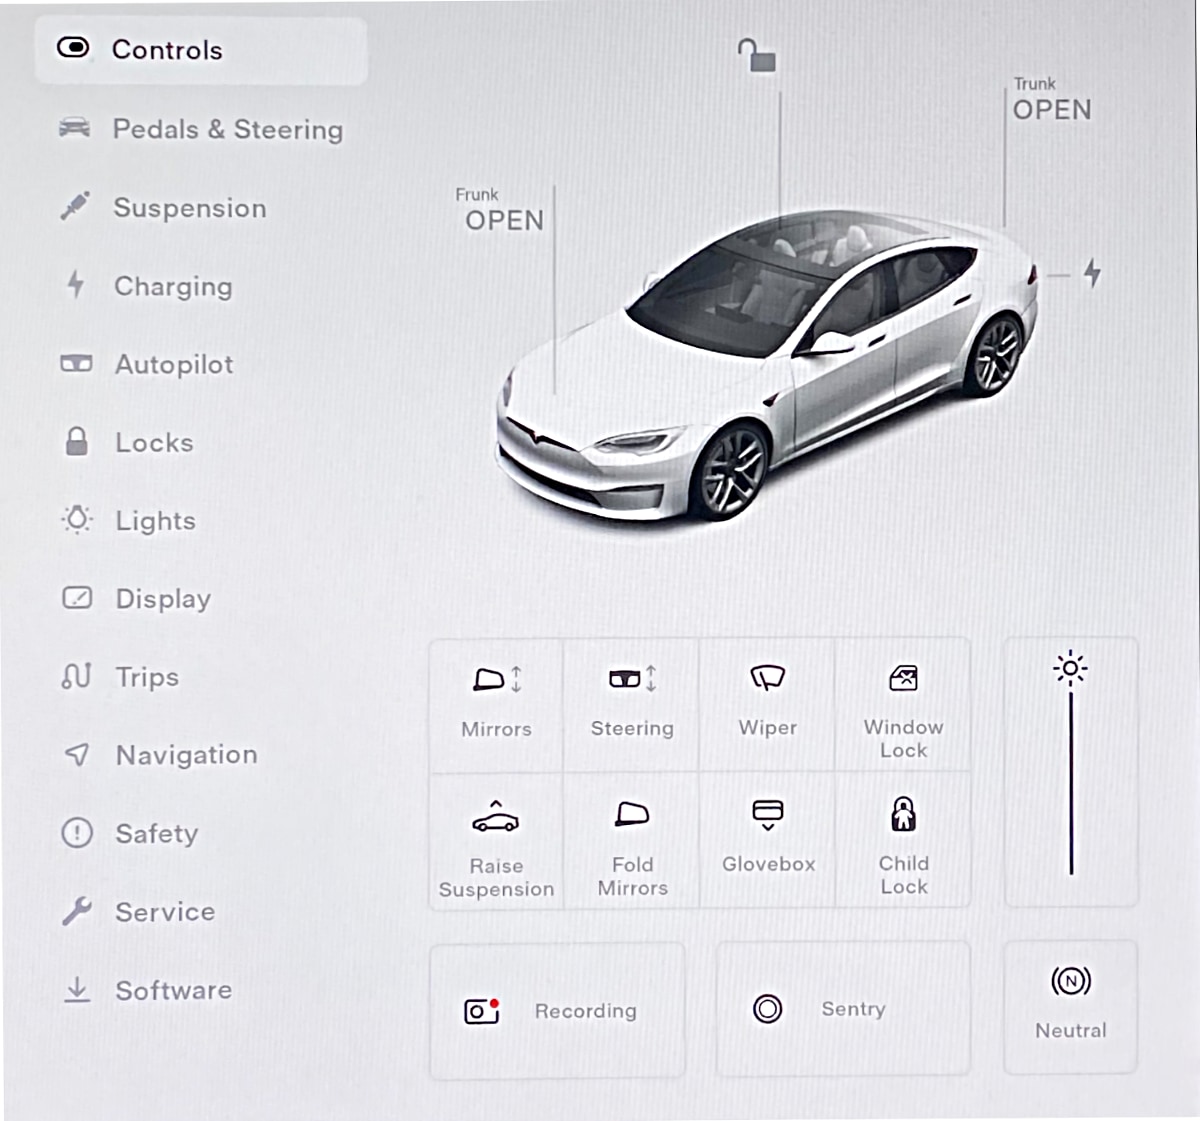 Tesla Redesigned Controls Panel feature in update 2021.32.20.1